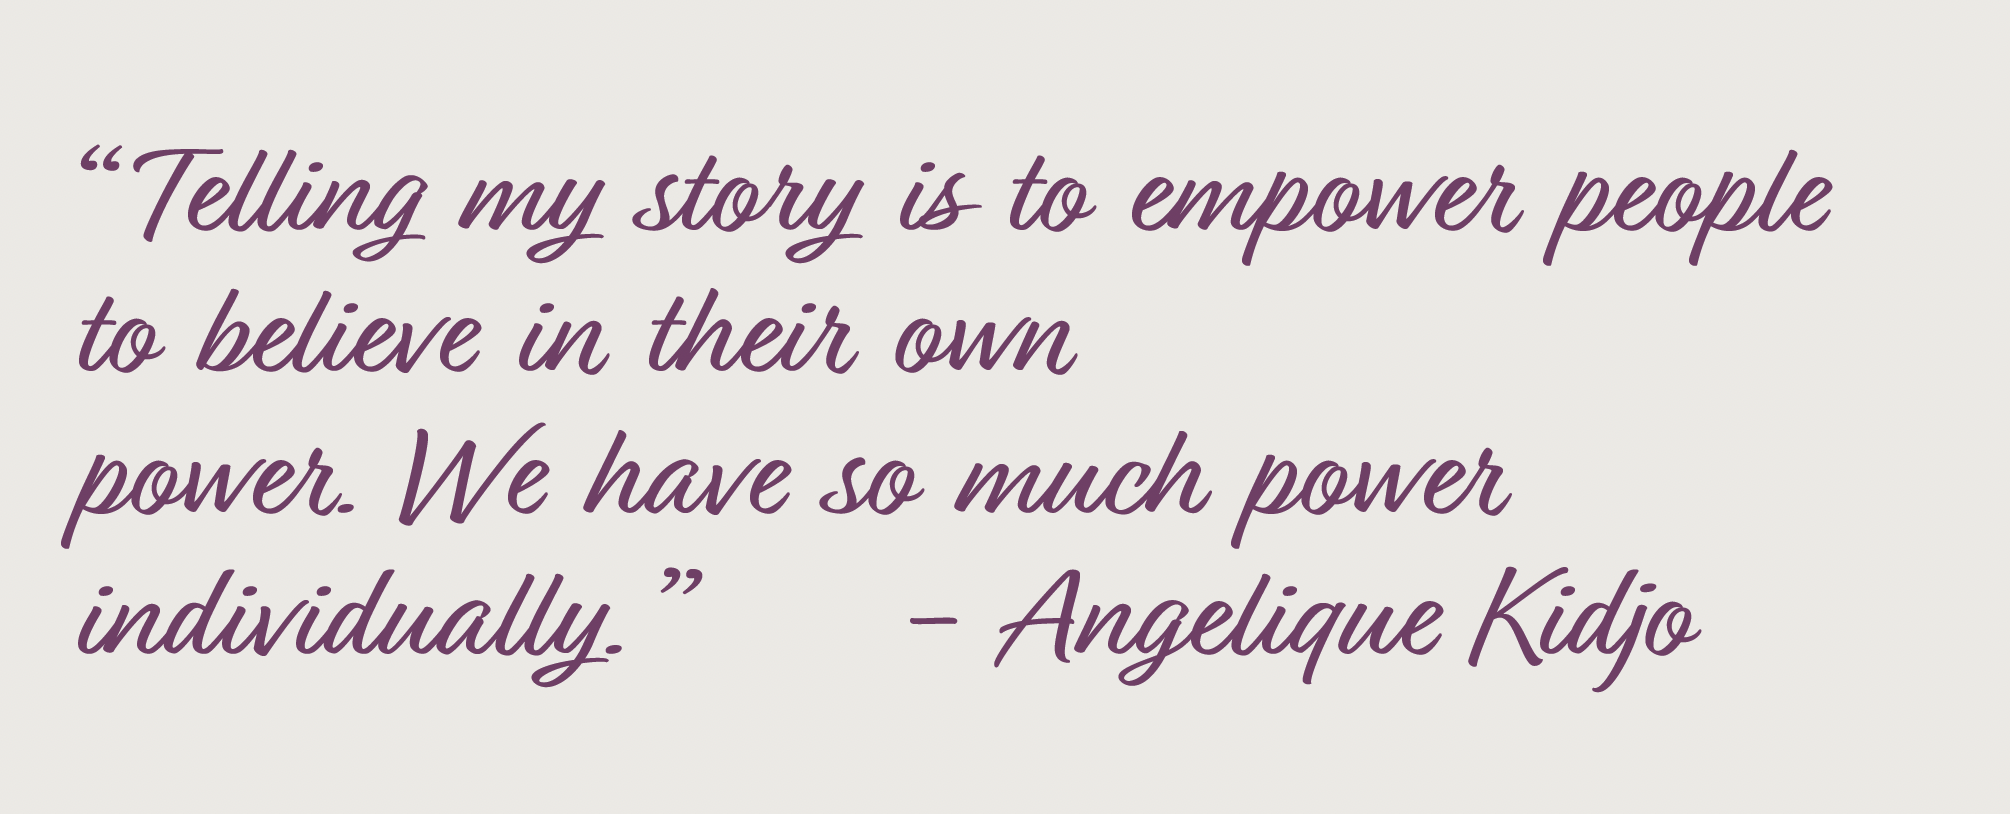 “Telling my story is to empower people to believe in their own power. We have so much power individually.” - Angelique Kidjo